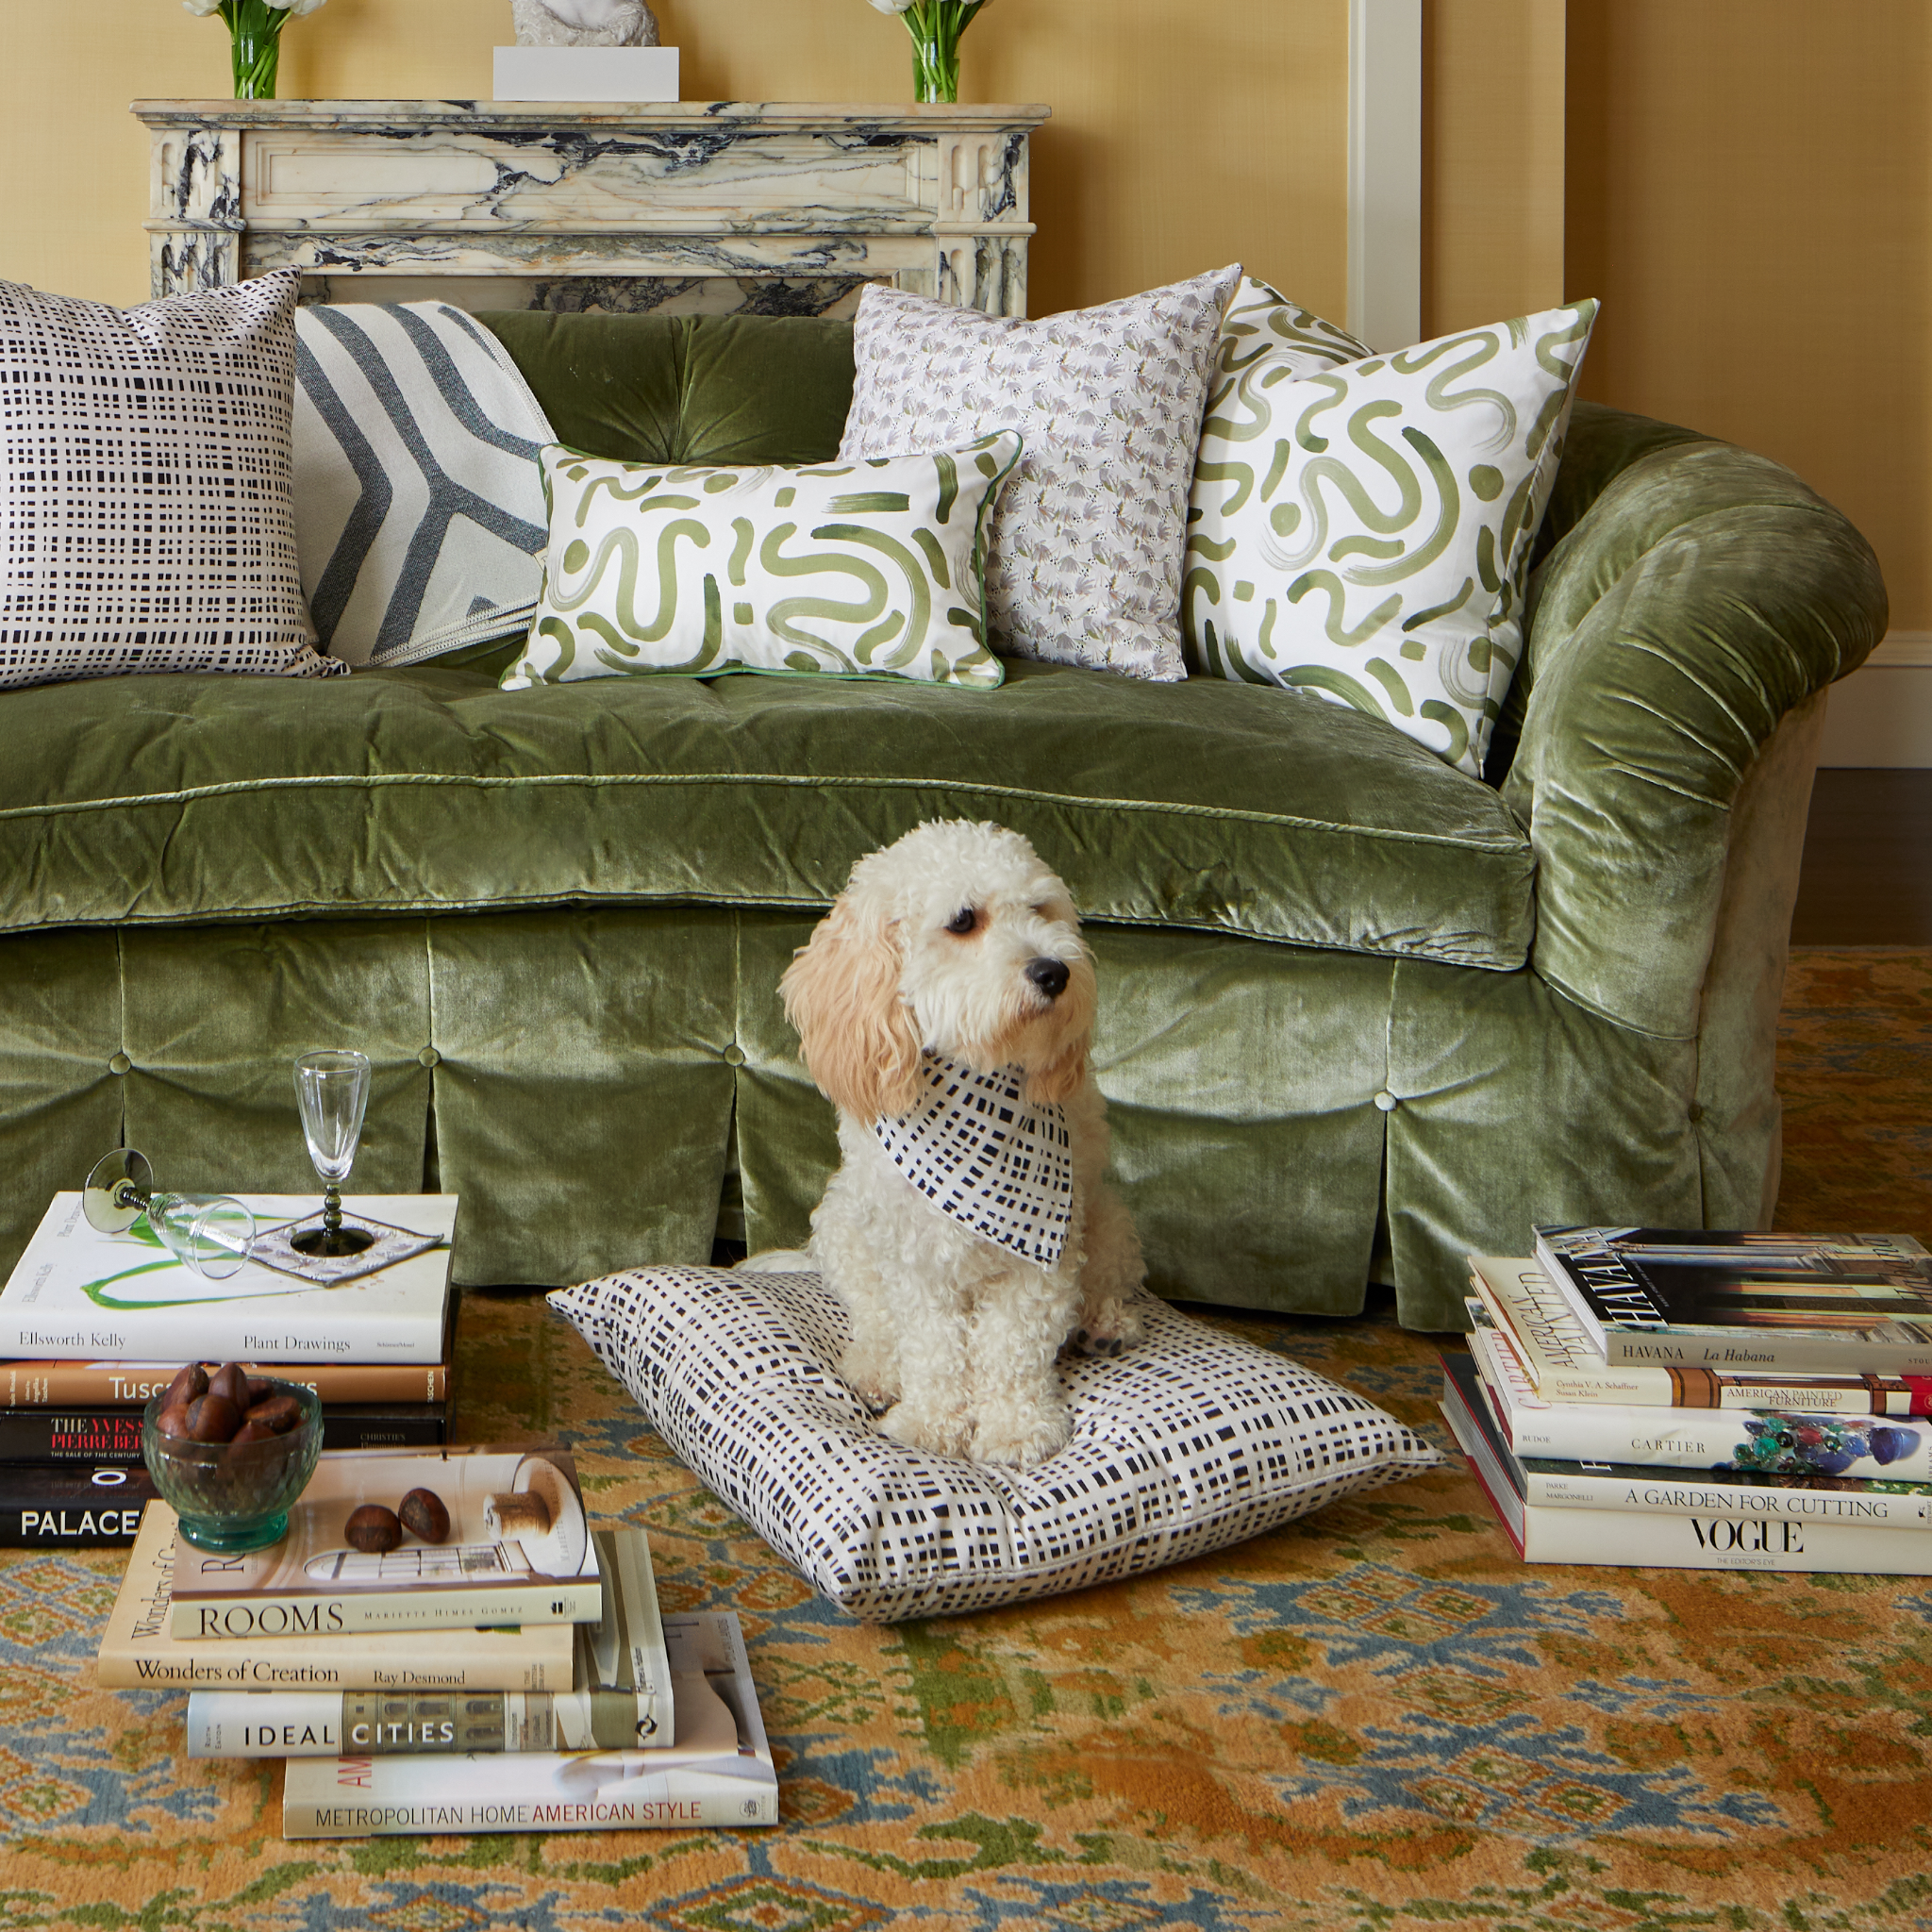 Living room styled with Black Gingham printed pillow, Grey Floral Printed Pillow, Moss Green Printed Lumbar and pillow on fern green velvet couch in the back of cream dog wearing Black Gingham fabric around neck on Black Gingham pillow surrounded by three stacks of books with decorations on top